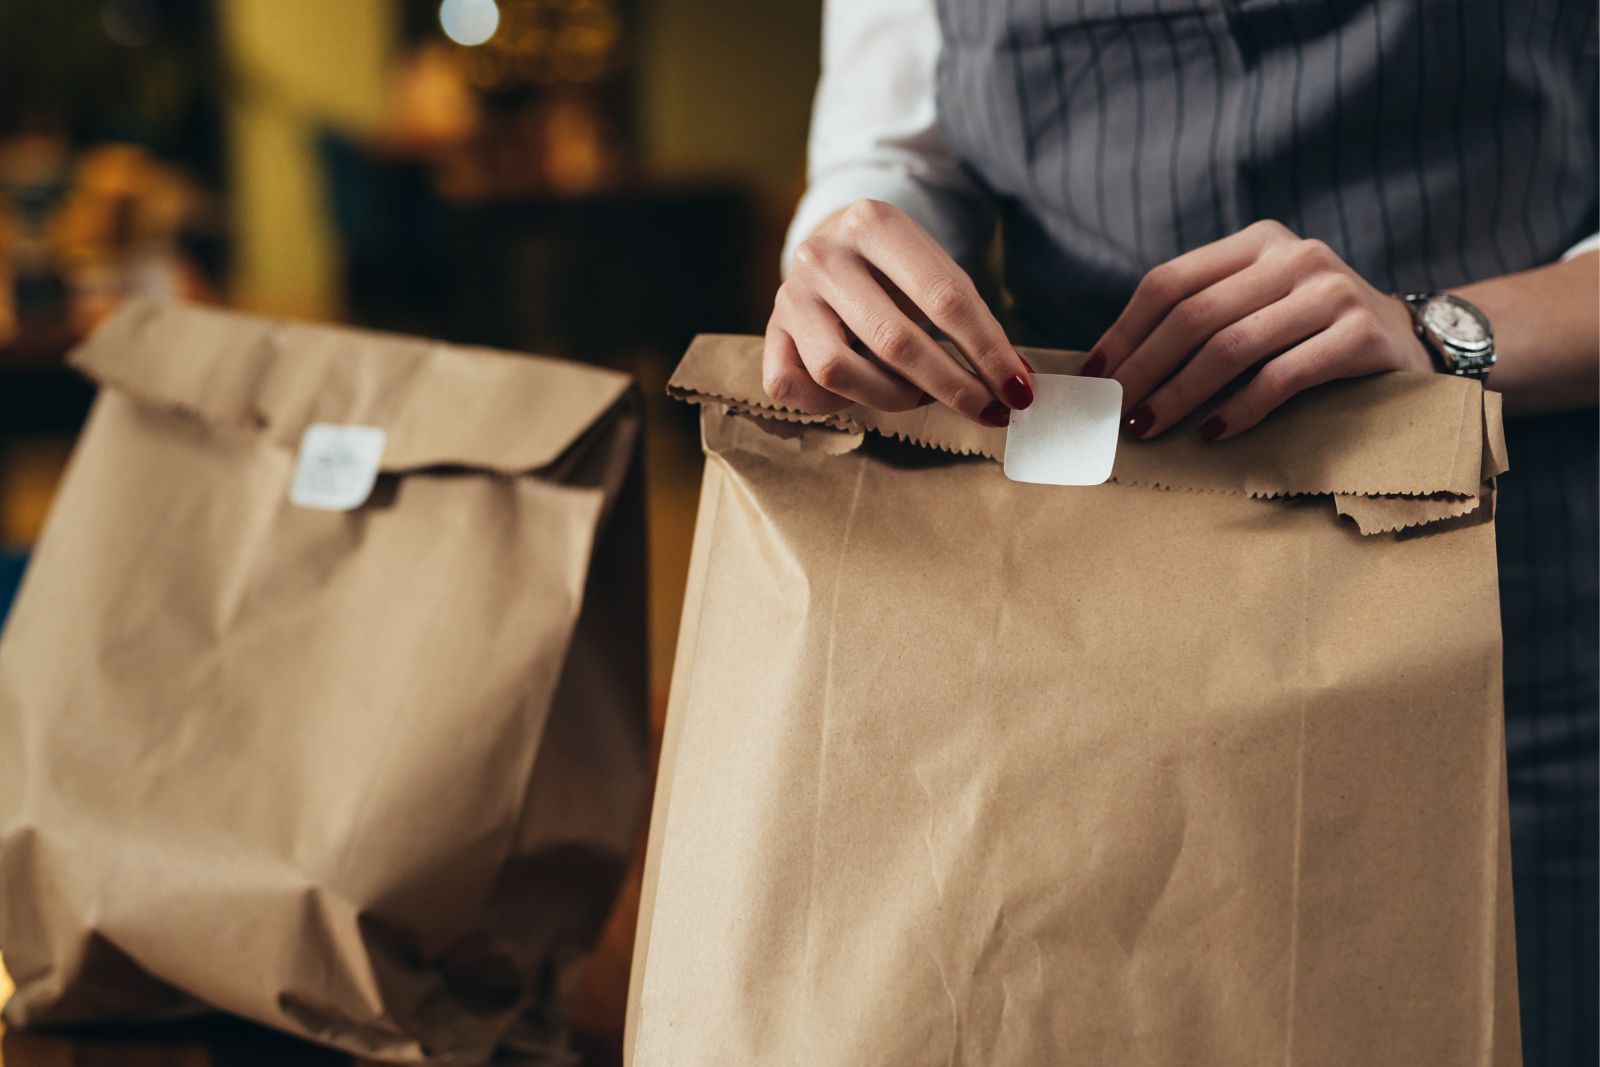 Food Safety on the Move: Safe Handling for Takeout and Delivery